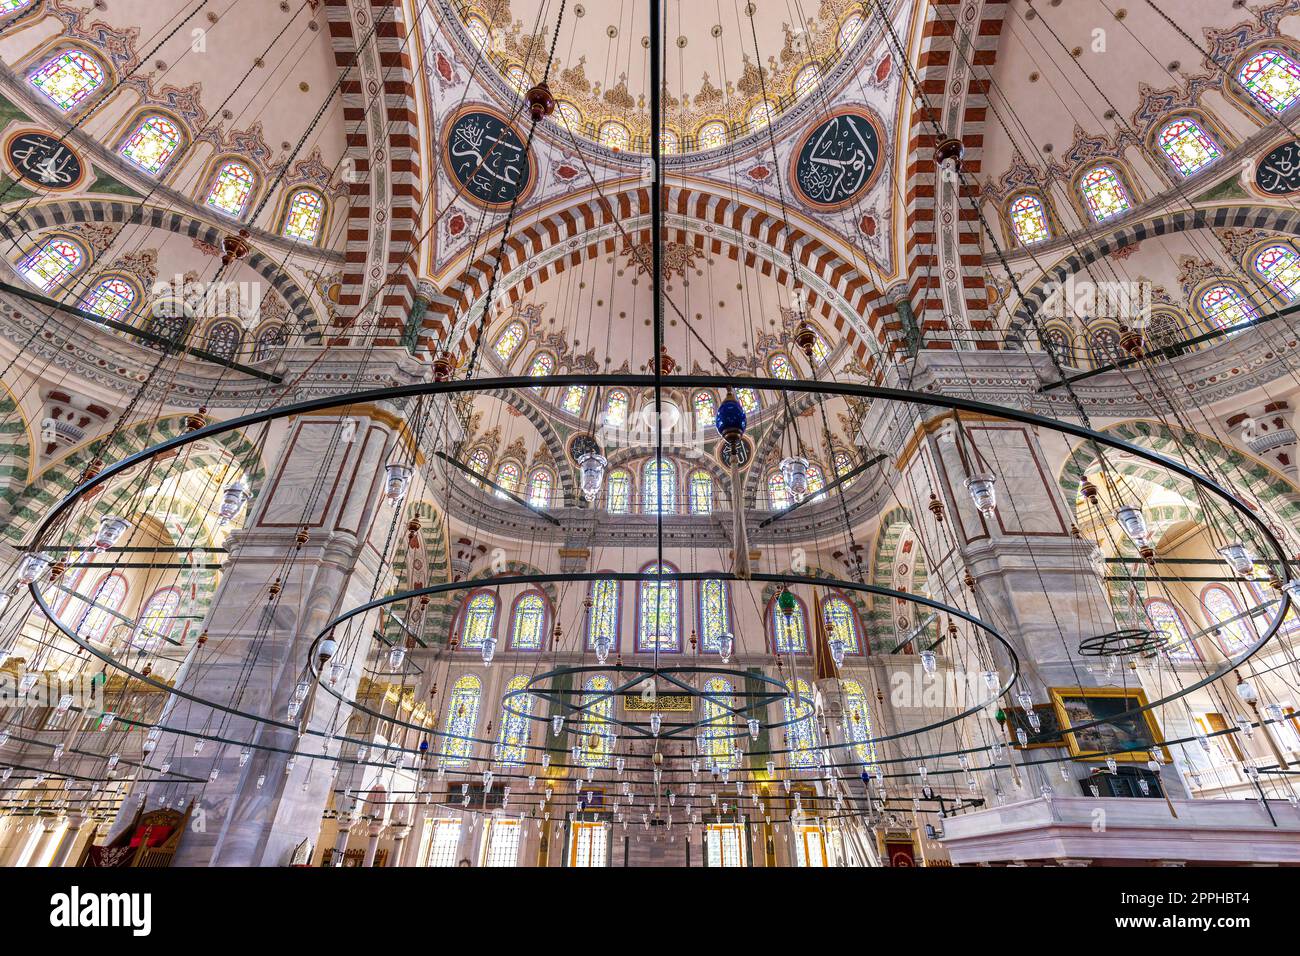 Fatih mosque in istanbul. internal view. Stock Photo